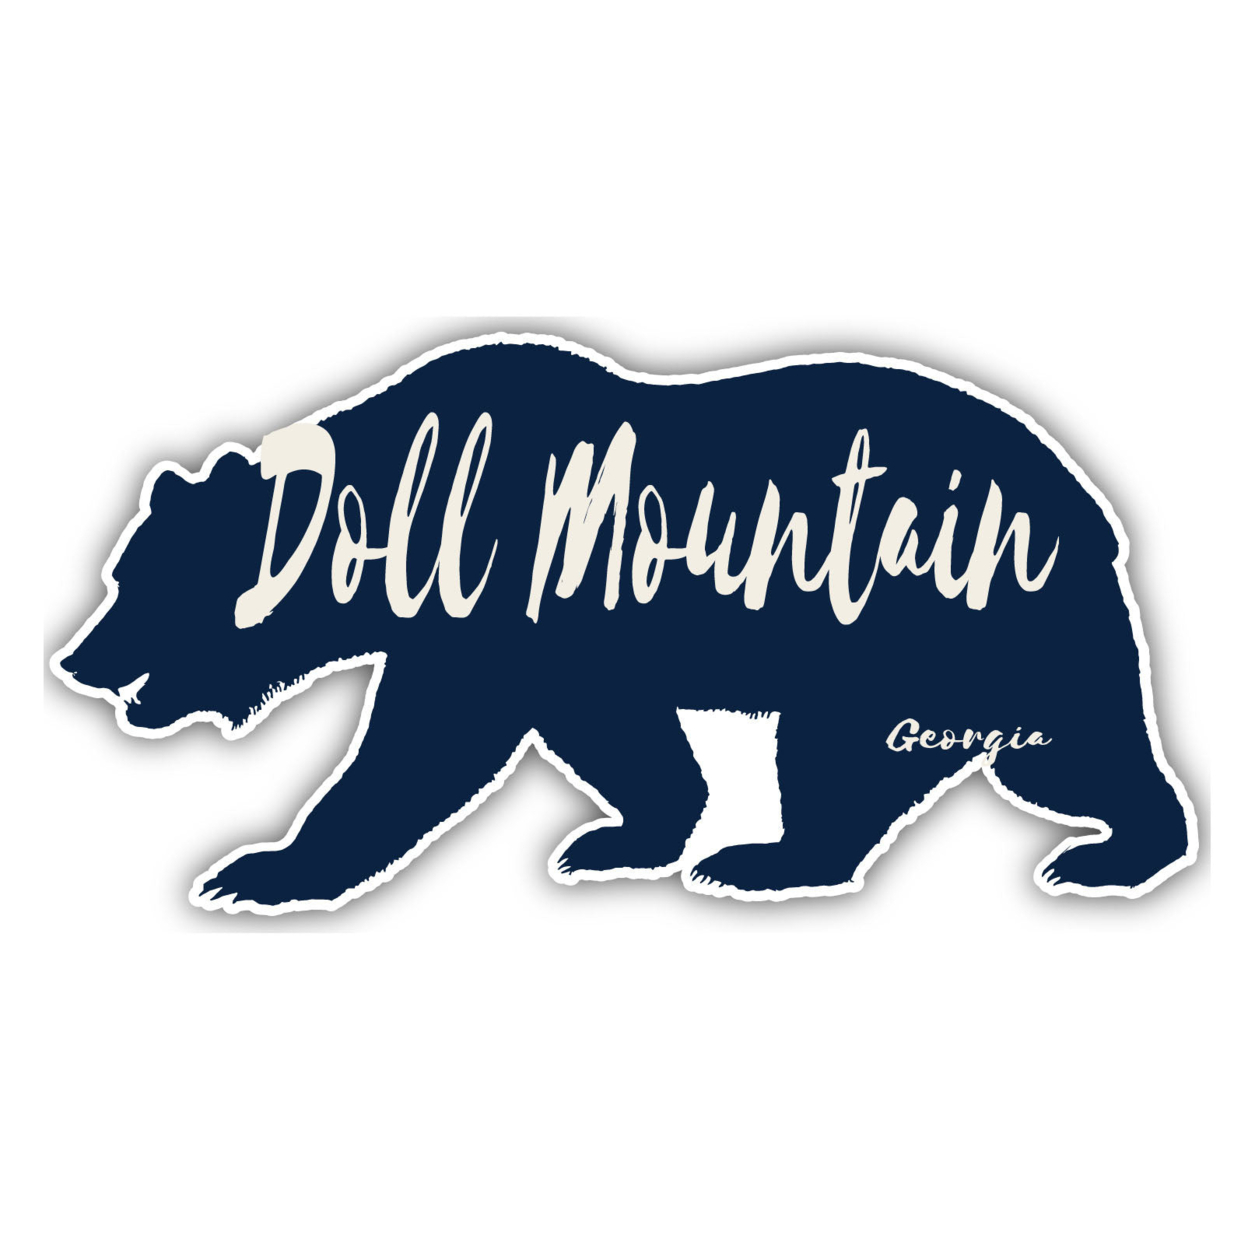 Doll Mountain Georgia Souvenir Decorative Stickers (Choose Theme And Size) - Single Unit, 8-Inch, Great Outdoors